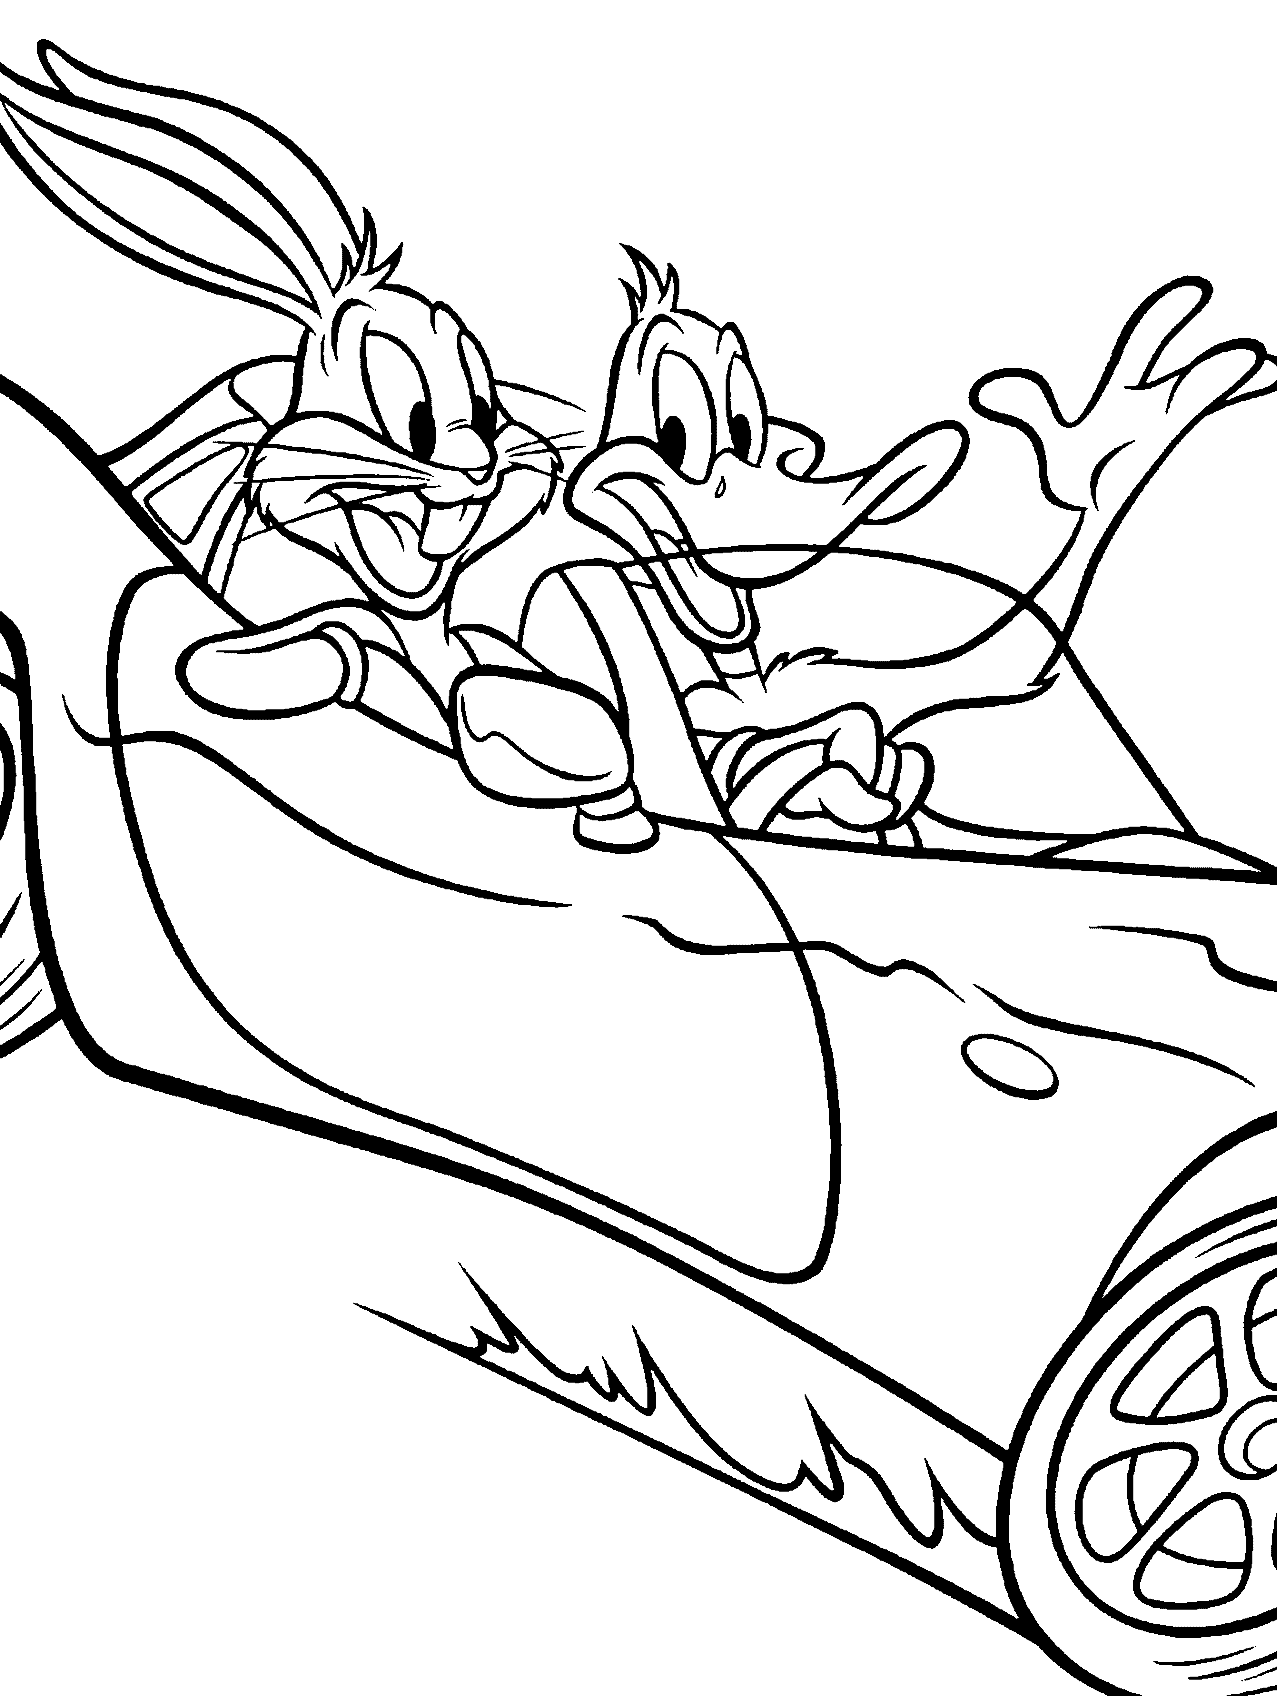 Daffy Duck And Bugs Bunny Coloring Page